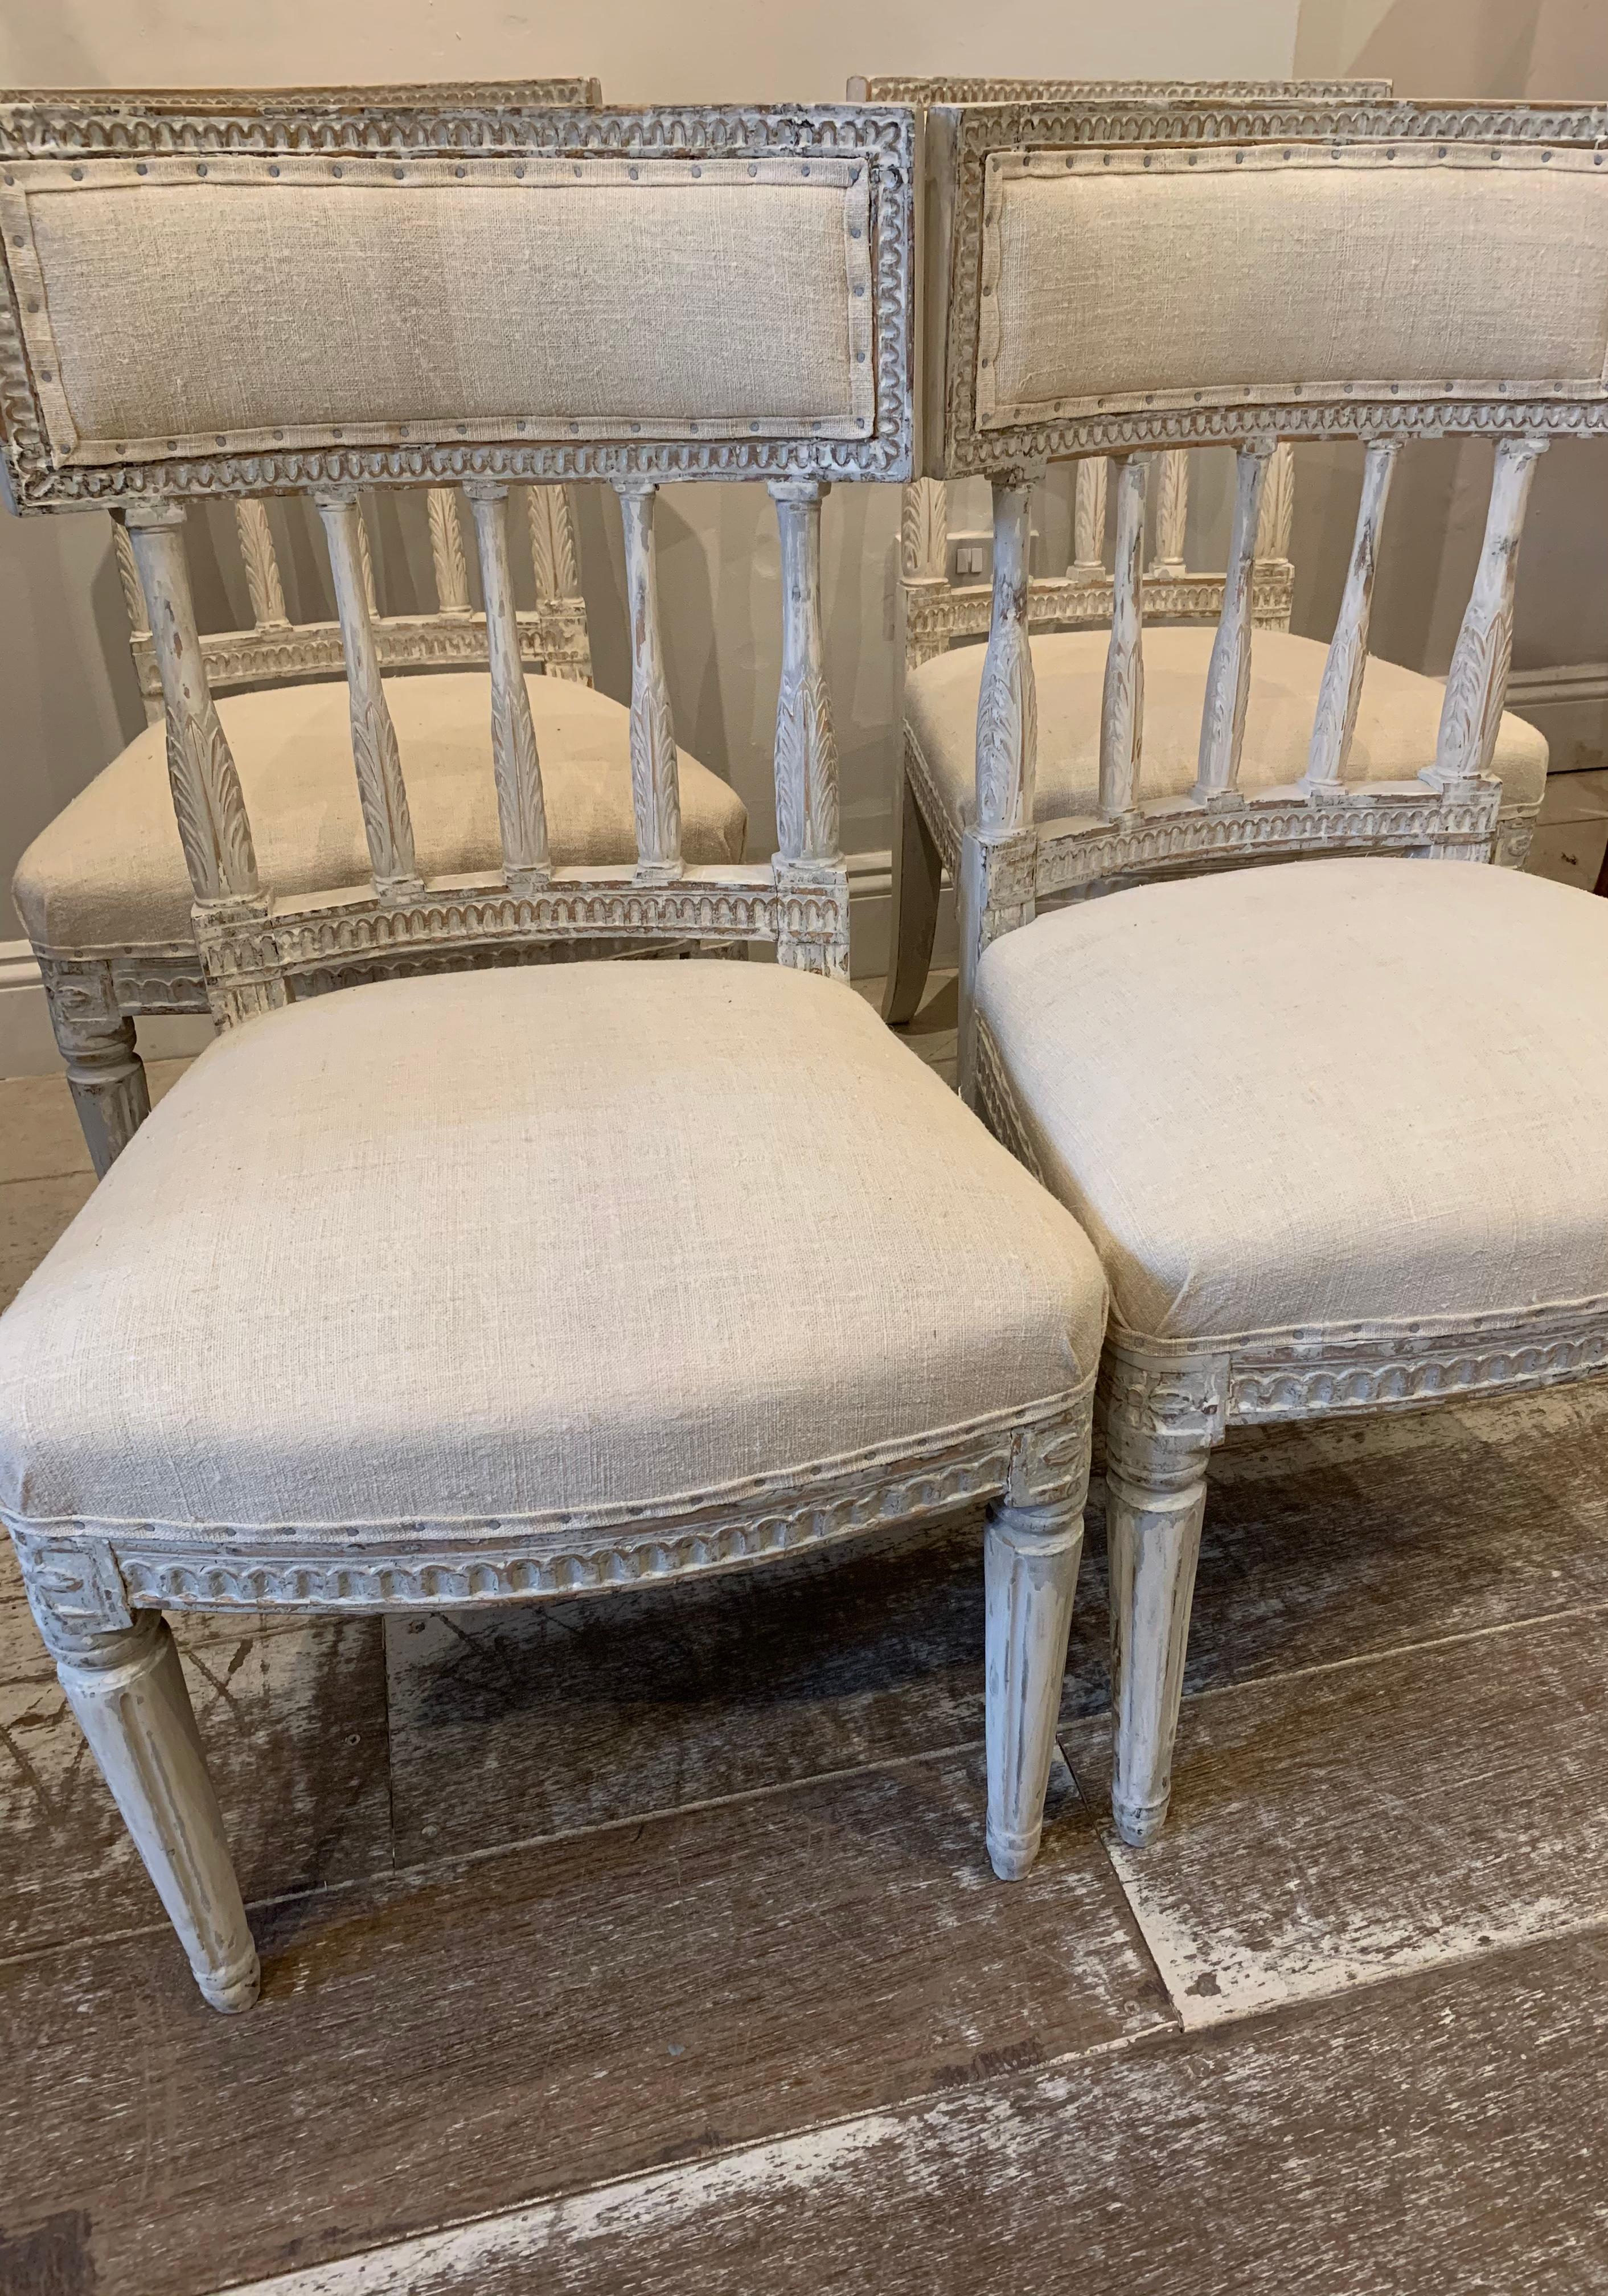 A lovely set of four Swedish Gustavian painted dining chairs circa 1800s.
The chairs are sturdy and have deep comfortable seats upholstered in a neutral vintage French linen.
The chairs have carved detailing to the frame and to their spindle backs